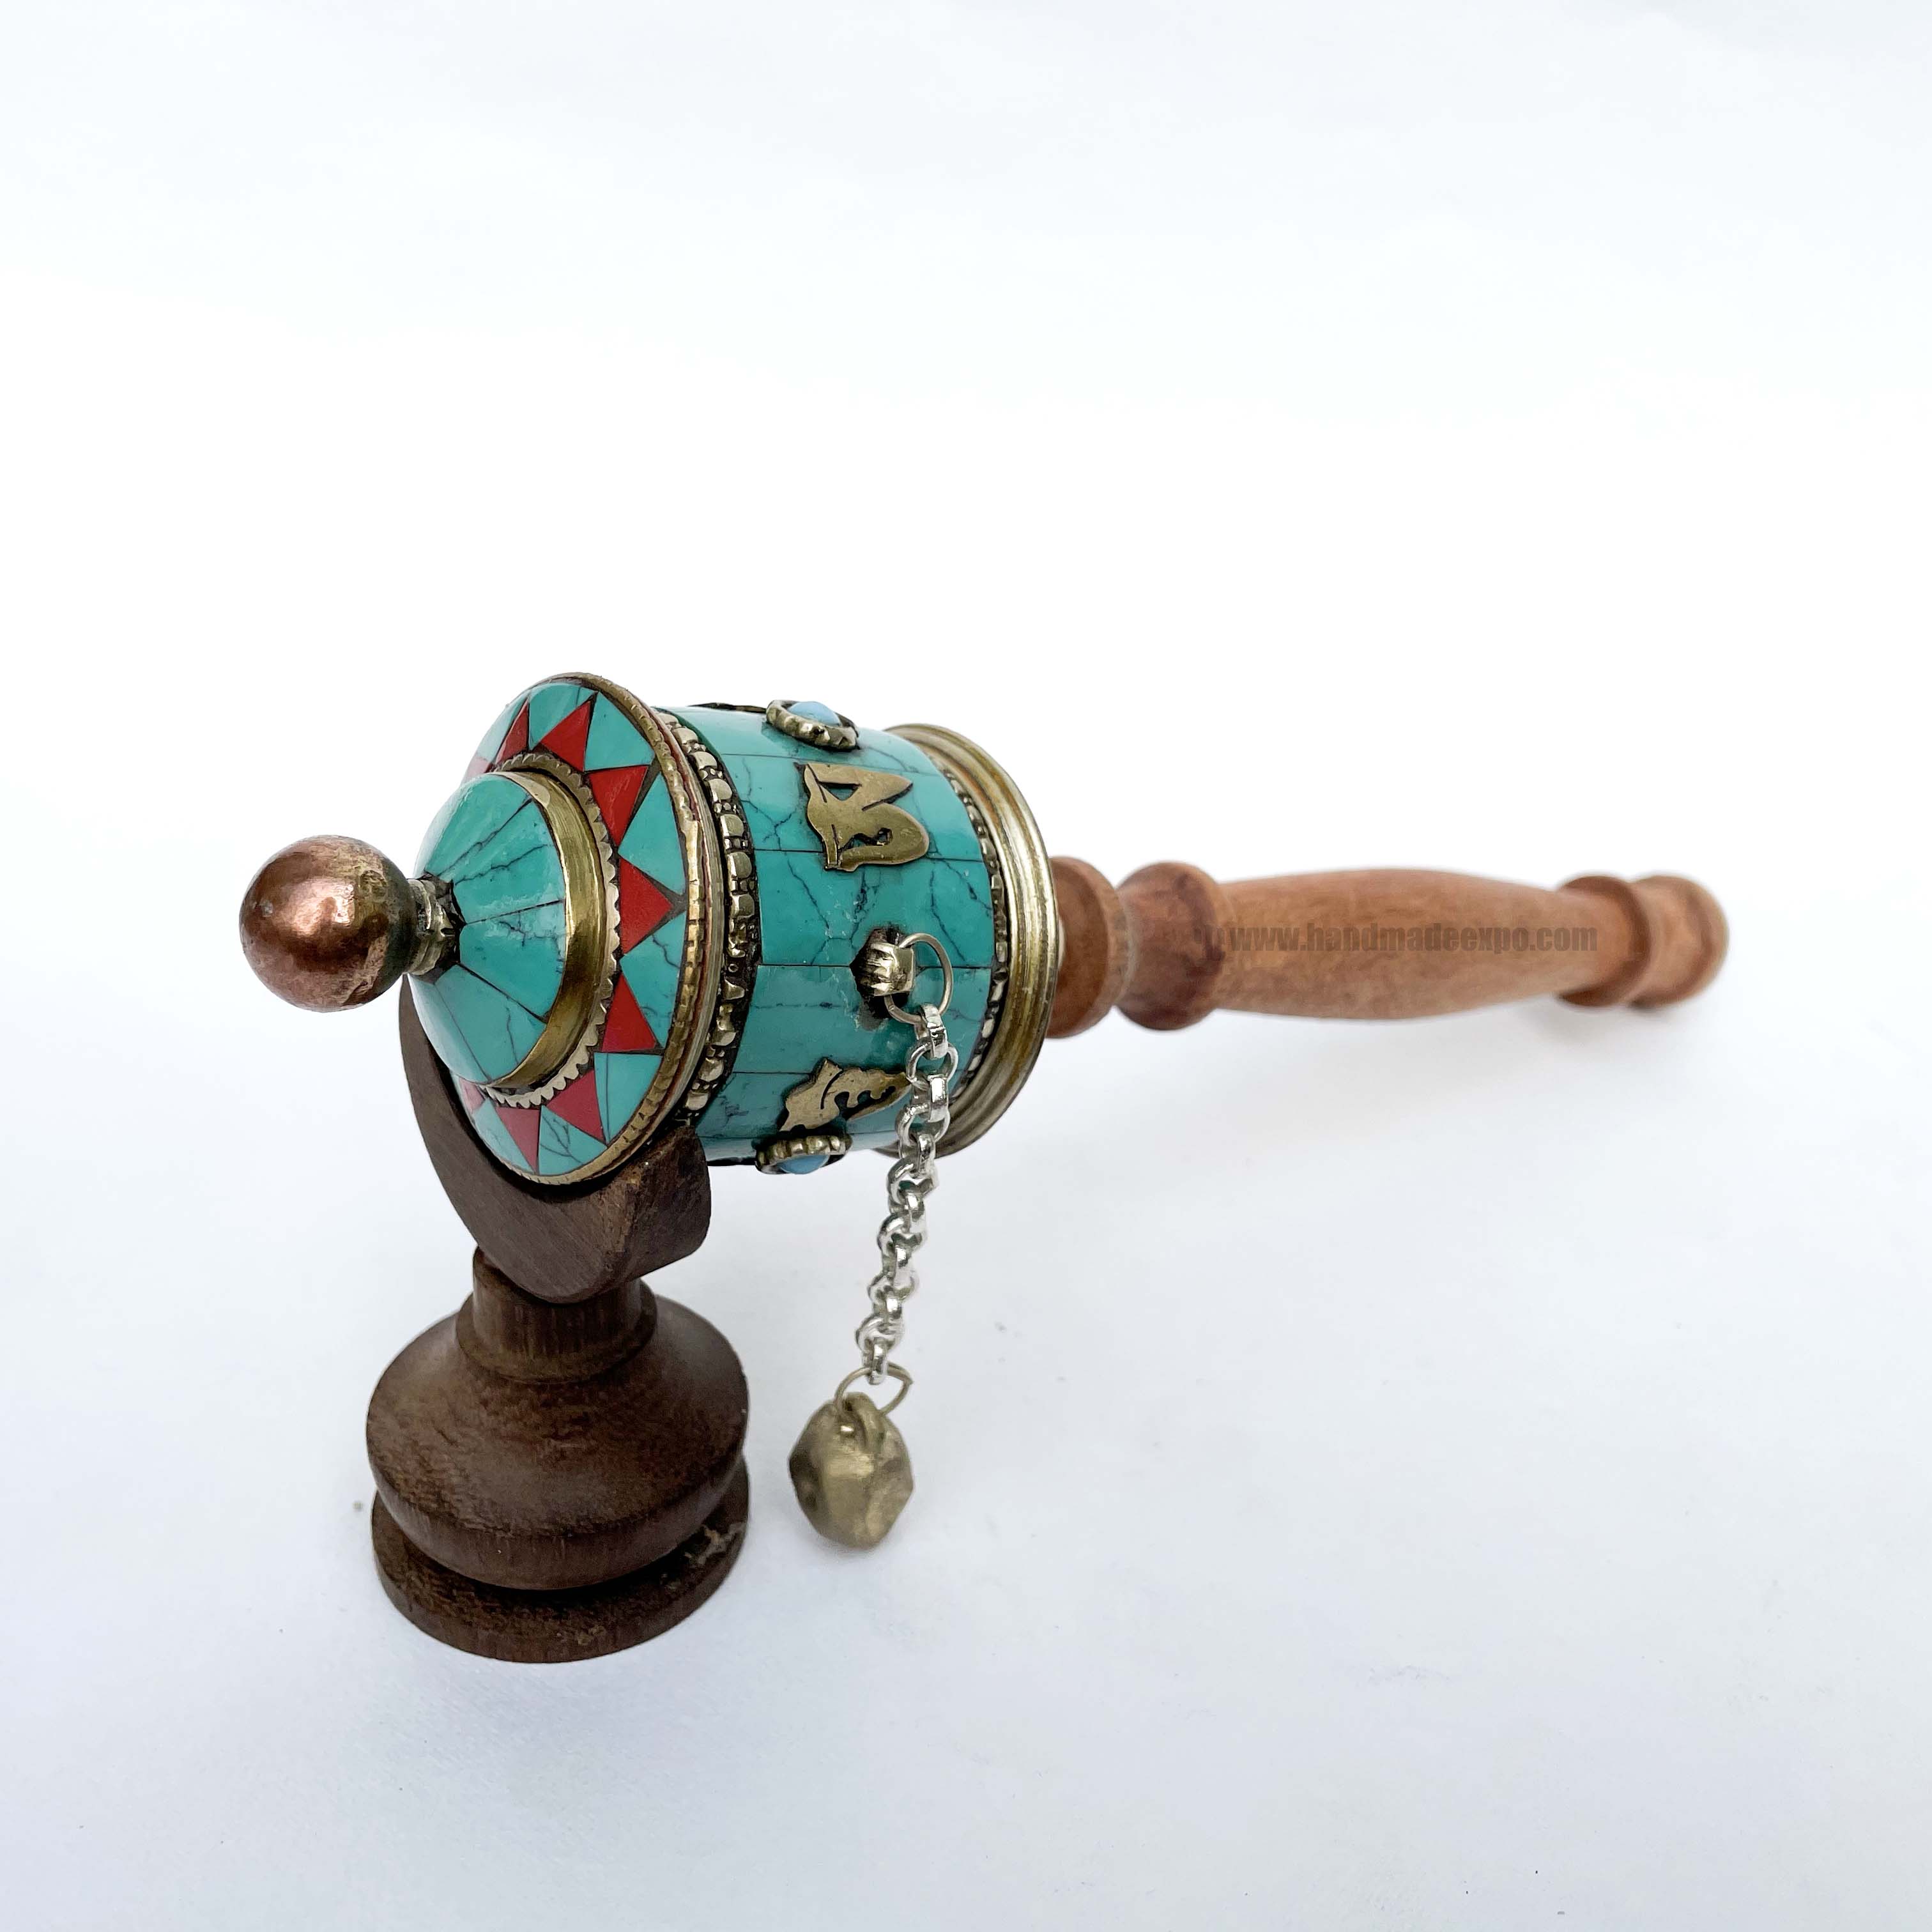 Sikku Brass Hand Held With Mantra Prayer Wheel, stone Setting, Blue Color